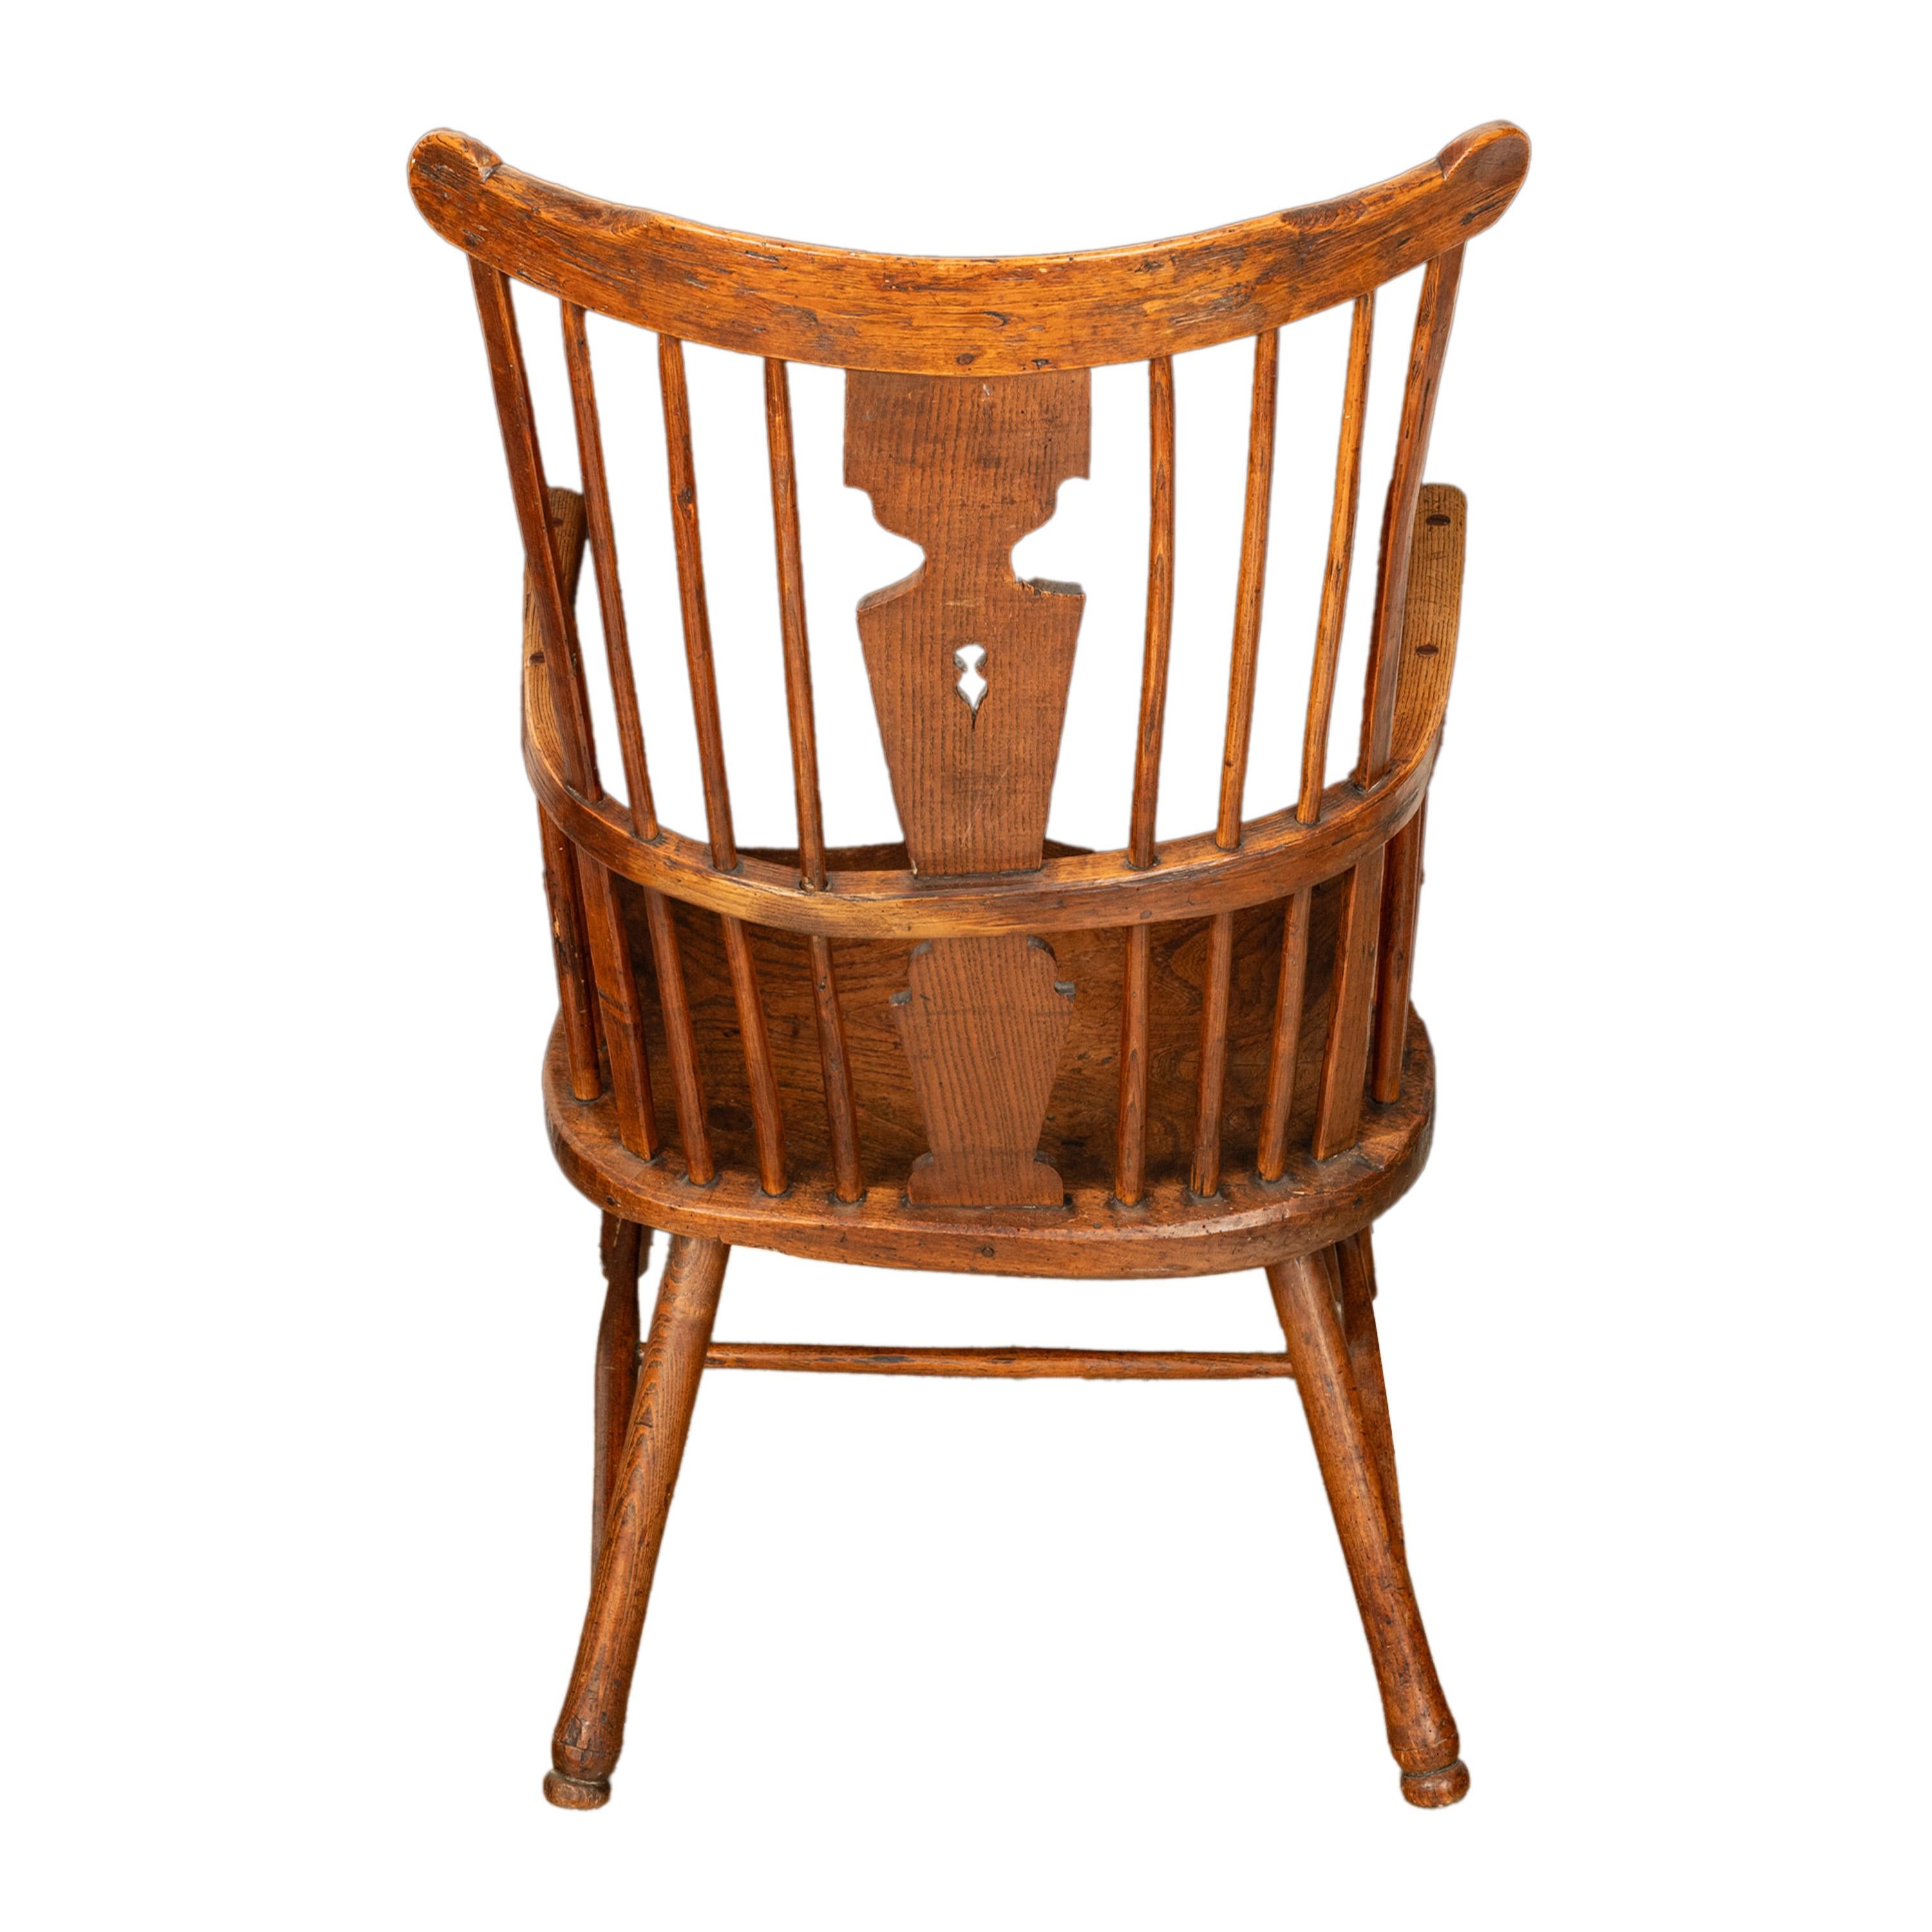 Ash Important Antique Earliest Recorded English Windsor Chair by Kerry Evesham 1793 For Sale